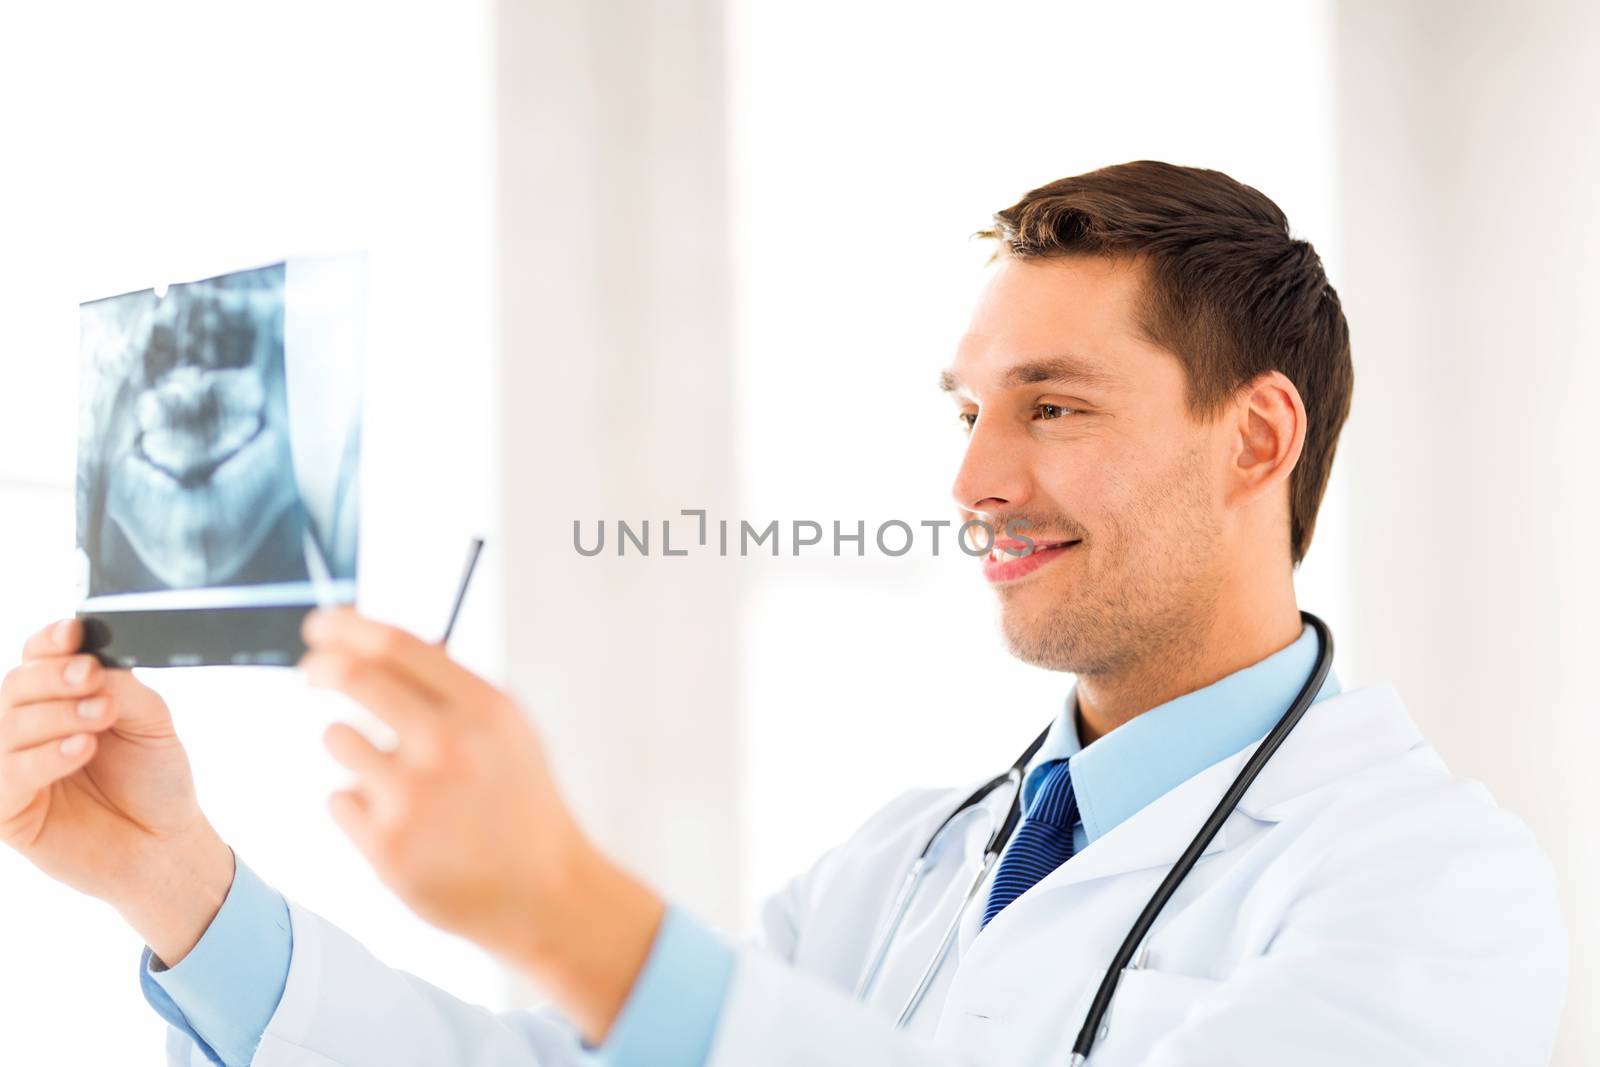 picture of male doctor or dentist with x-ray